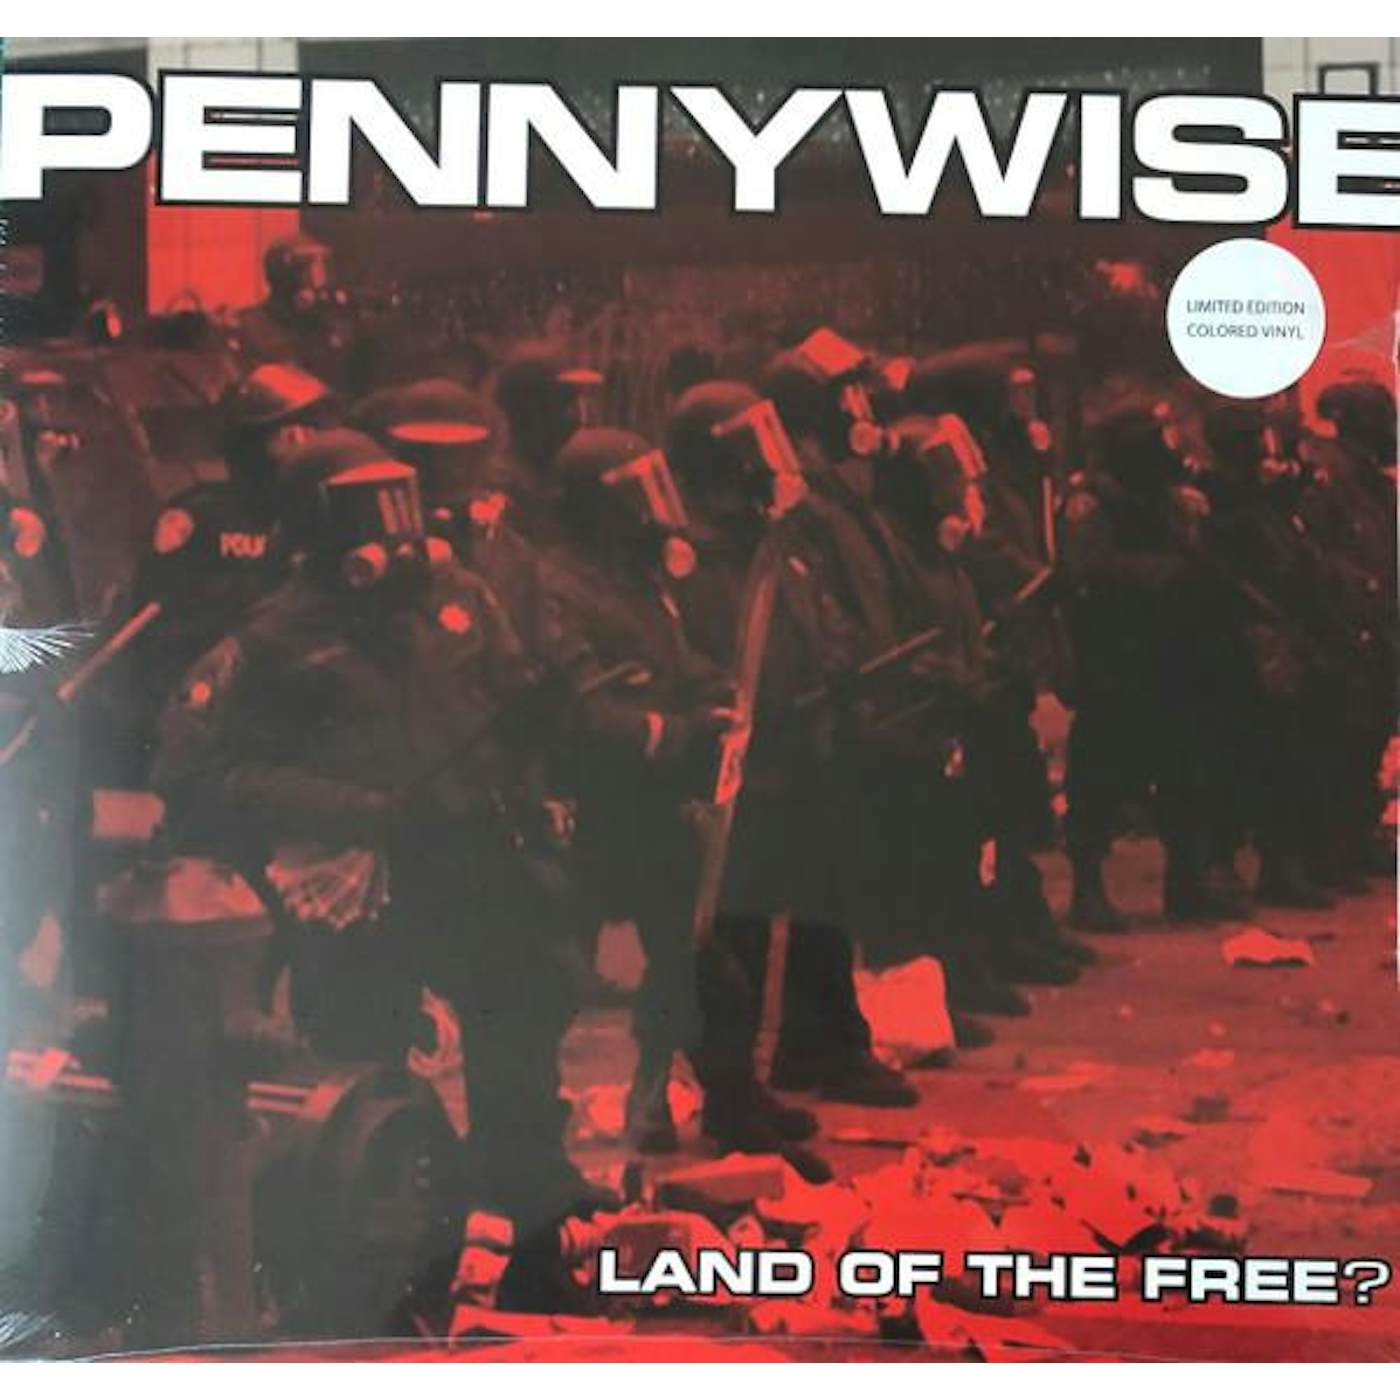 Pennywise LAND OF THE FREE? (RED VINYL) Vinyl Record